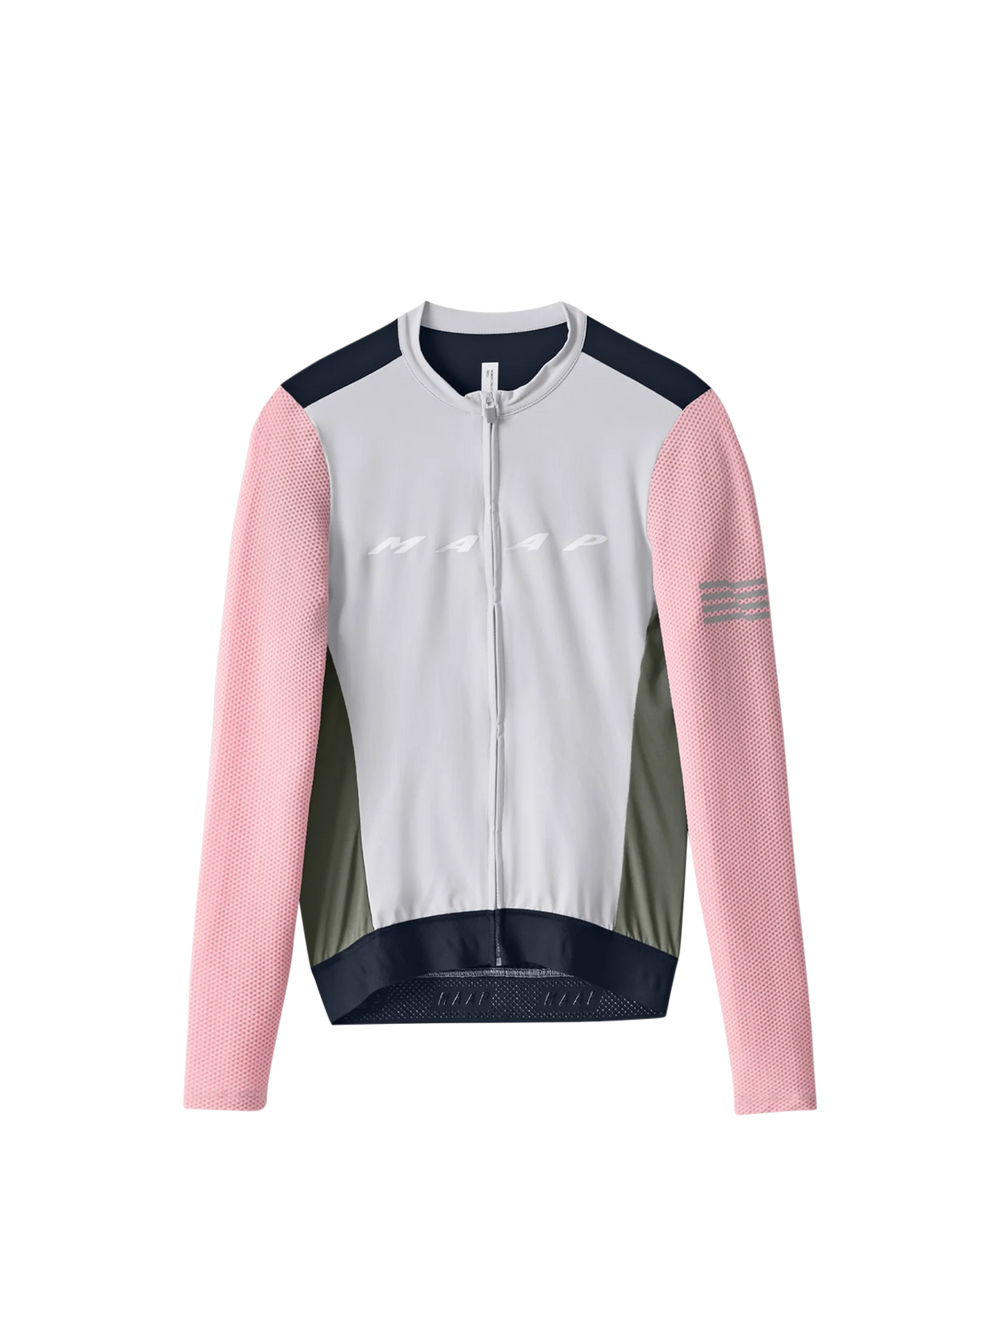 Product Image for Women's Evade OffCuts Pro Base LS Jersey